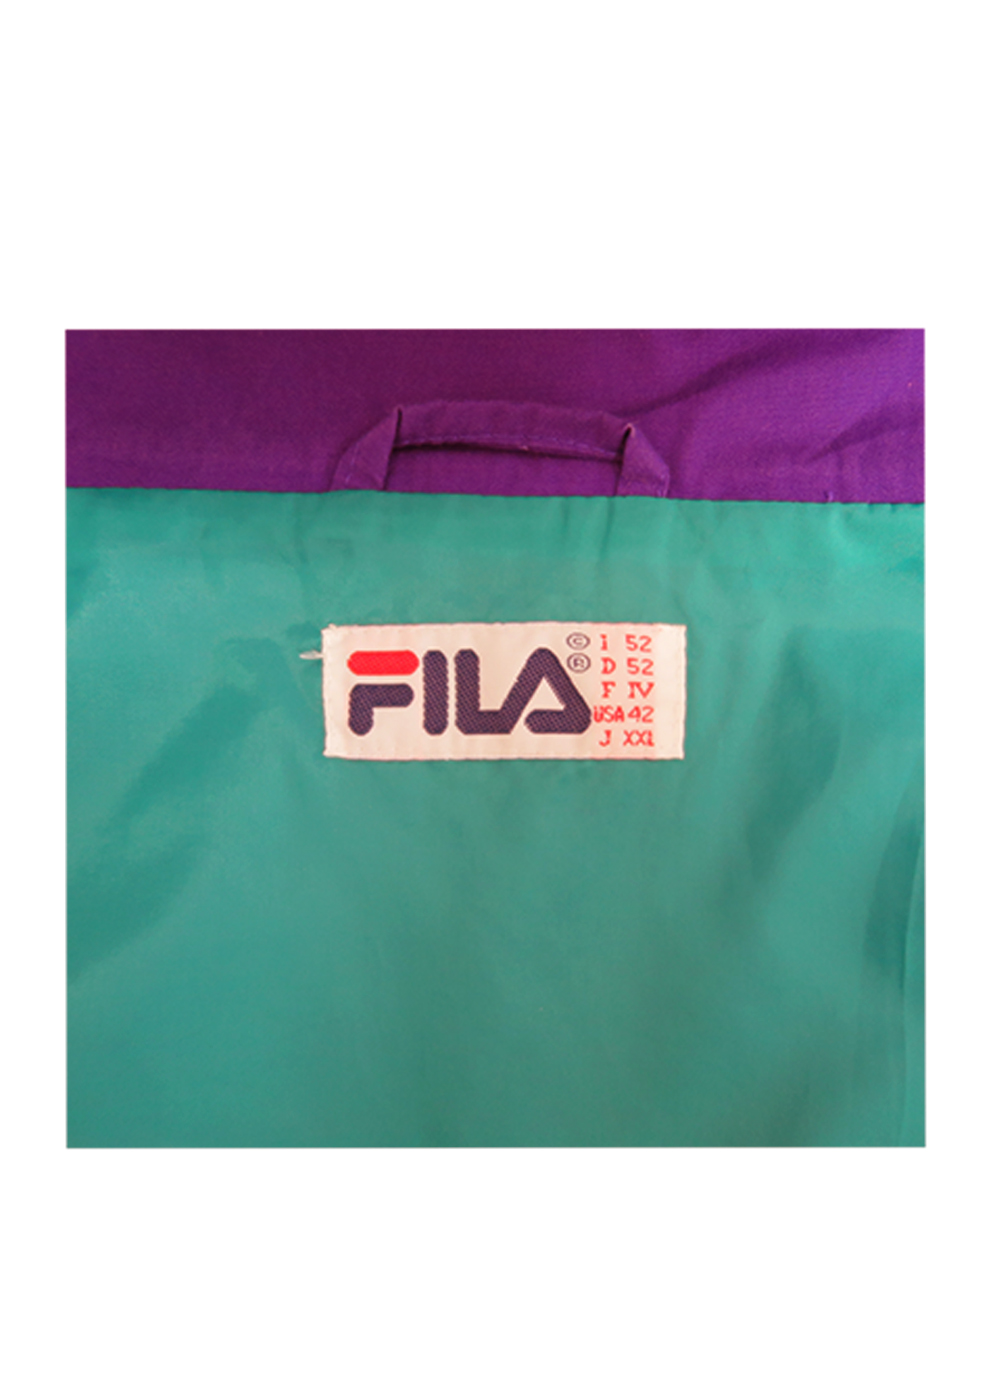 Fila Magic Line Double Jacket in Purple and Green – L/XL | Reign Vintage